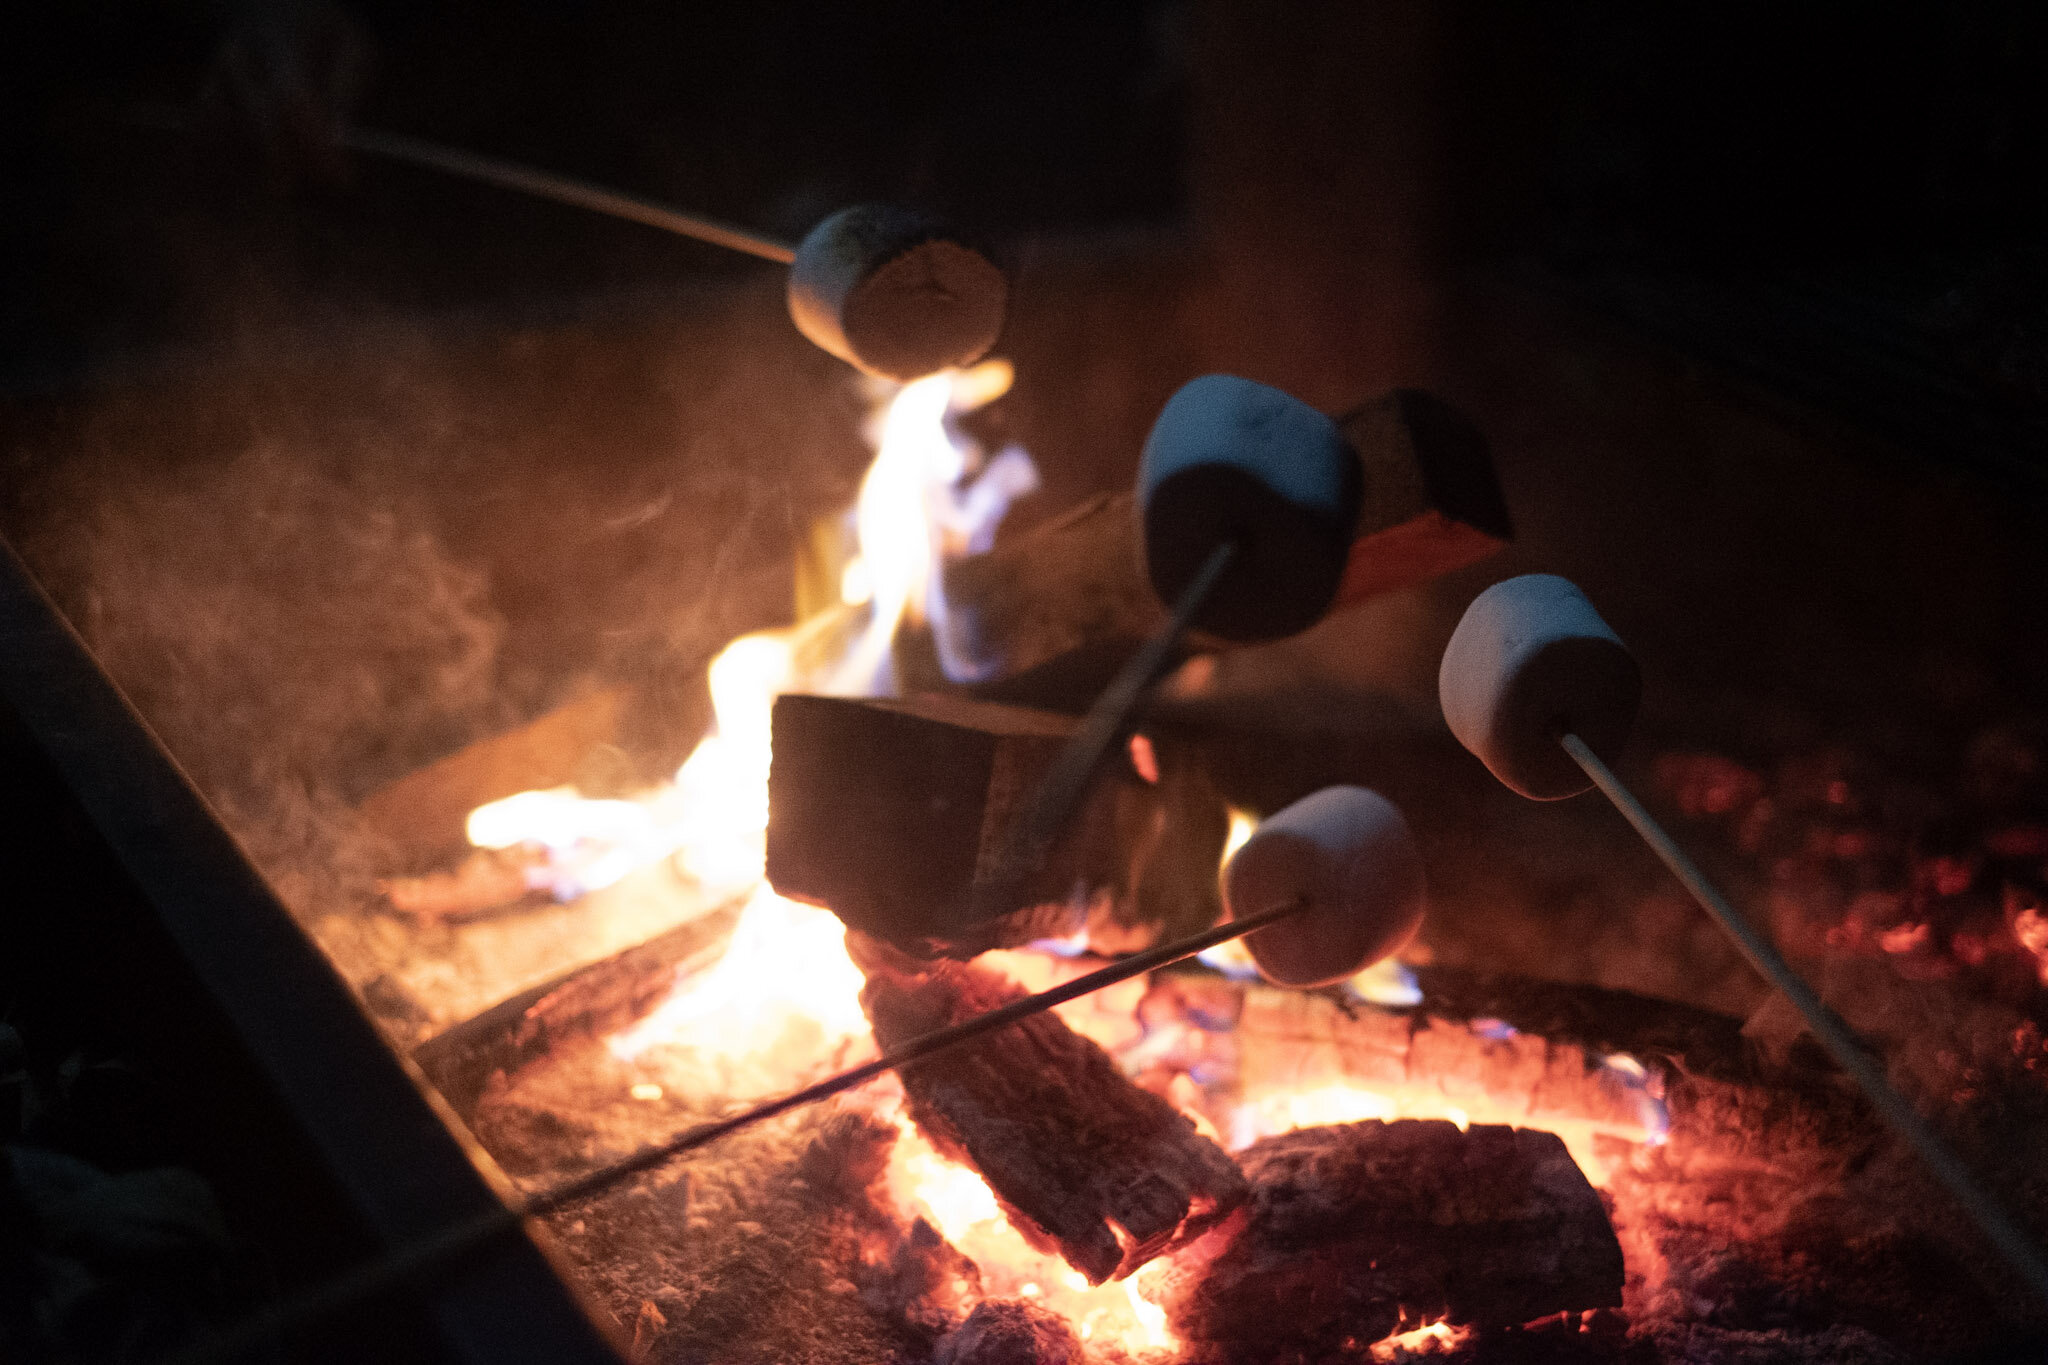  s’mores!  